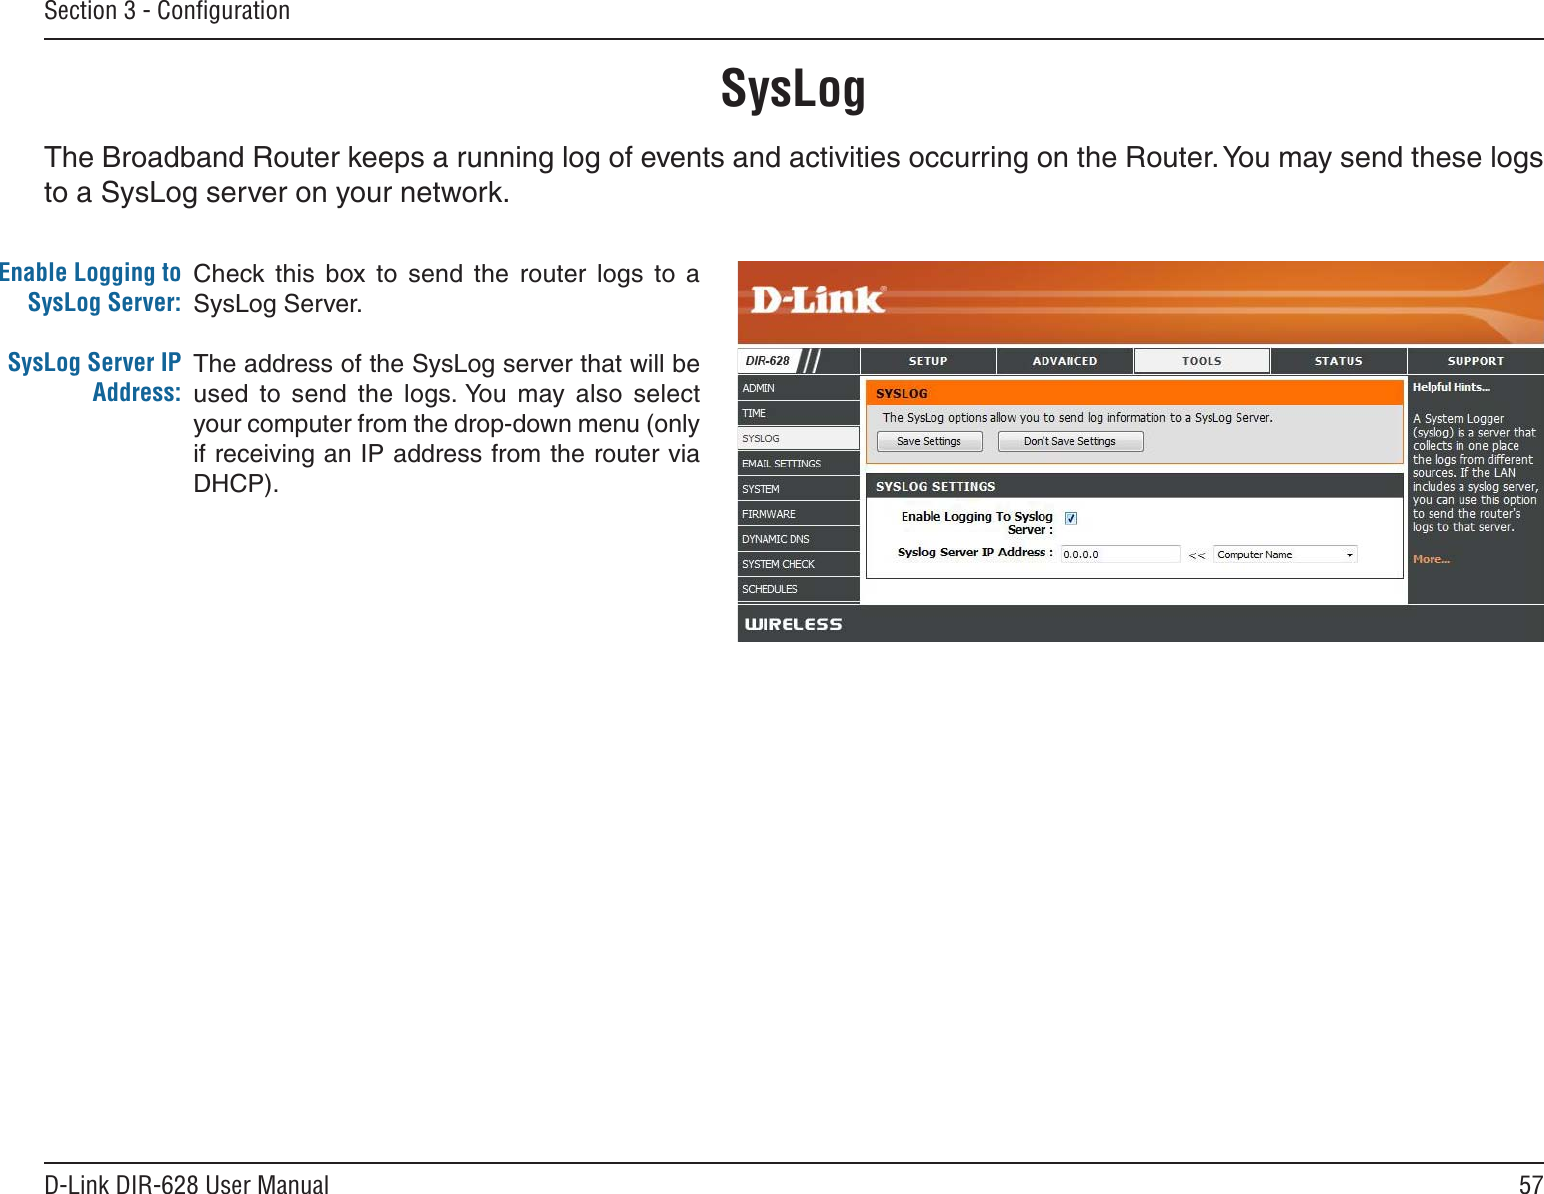 57D-Link DIR-628 User ManualSection 3 - ConﬁgurationSysLogThe Broadband Router keeps a running log of events and activities occurring on the Router. You may send these logs to a SysLog server on your network.Enable Logging to SysLog Server:SysLog Server IP Address:Check this  box  to  send  the  router  logs  to  a SysLog Server.The address of the SysLog server that will be used  to  send  the  logs. You  may  also  select your computer from the drop-down menu (only if receiving an IP address from the router via DHCP).